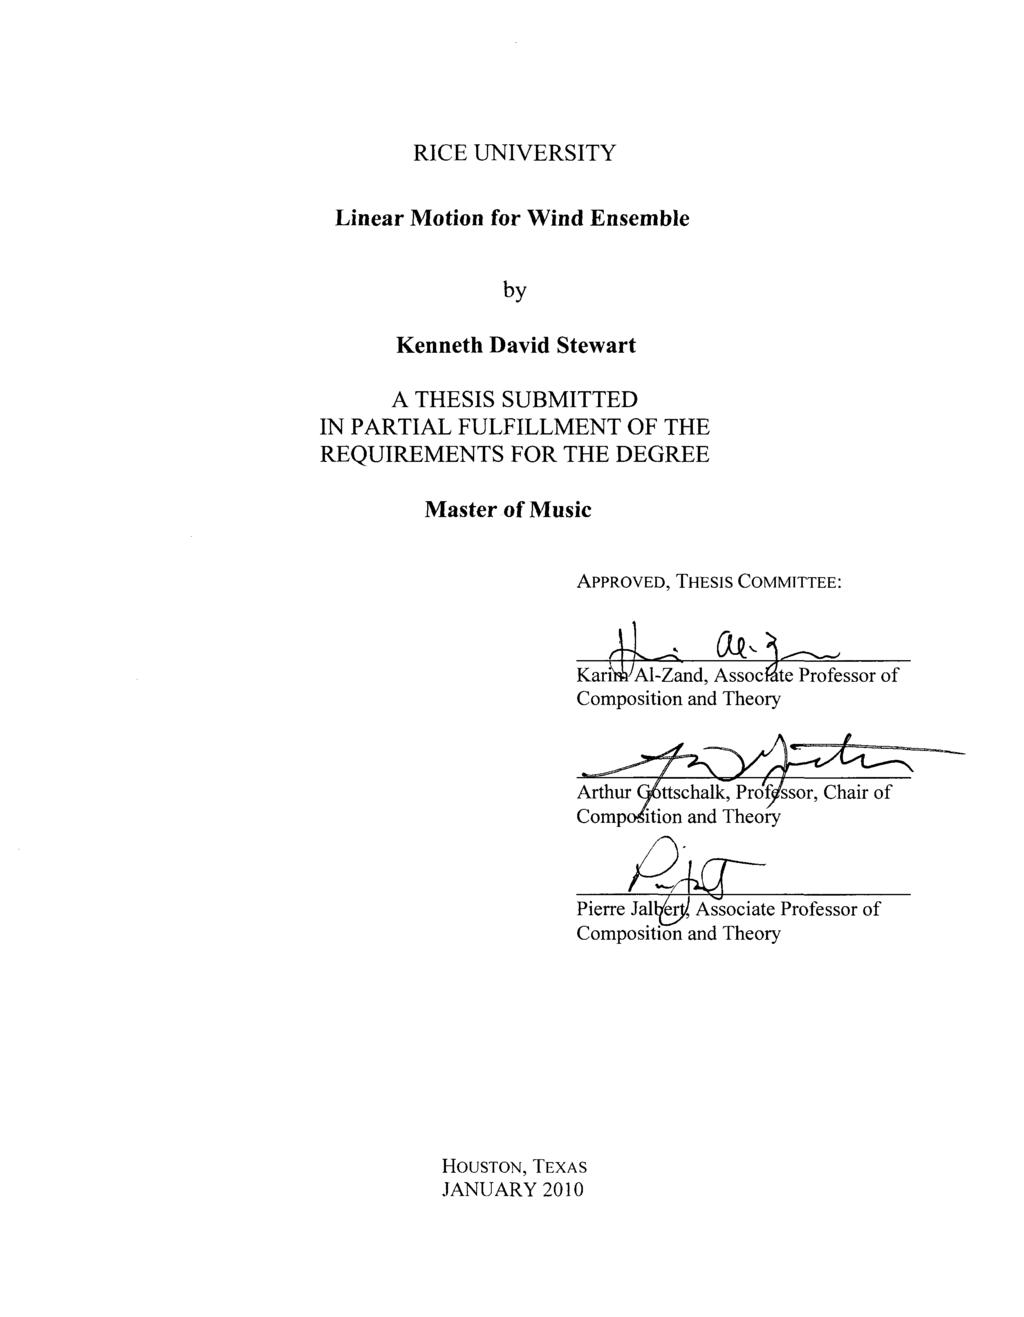 RICE UNIVERSITY Linear Motion for Wind Ensemble by Kenneth David Stewart A THESIS SUBMITTED IN PARTIAL FULFILLMENT OF THE REQUIREMENTS FOR THE DEGREE Master of Music APPROVED, THESIS COMMITTEE: OJ^